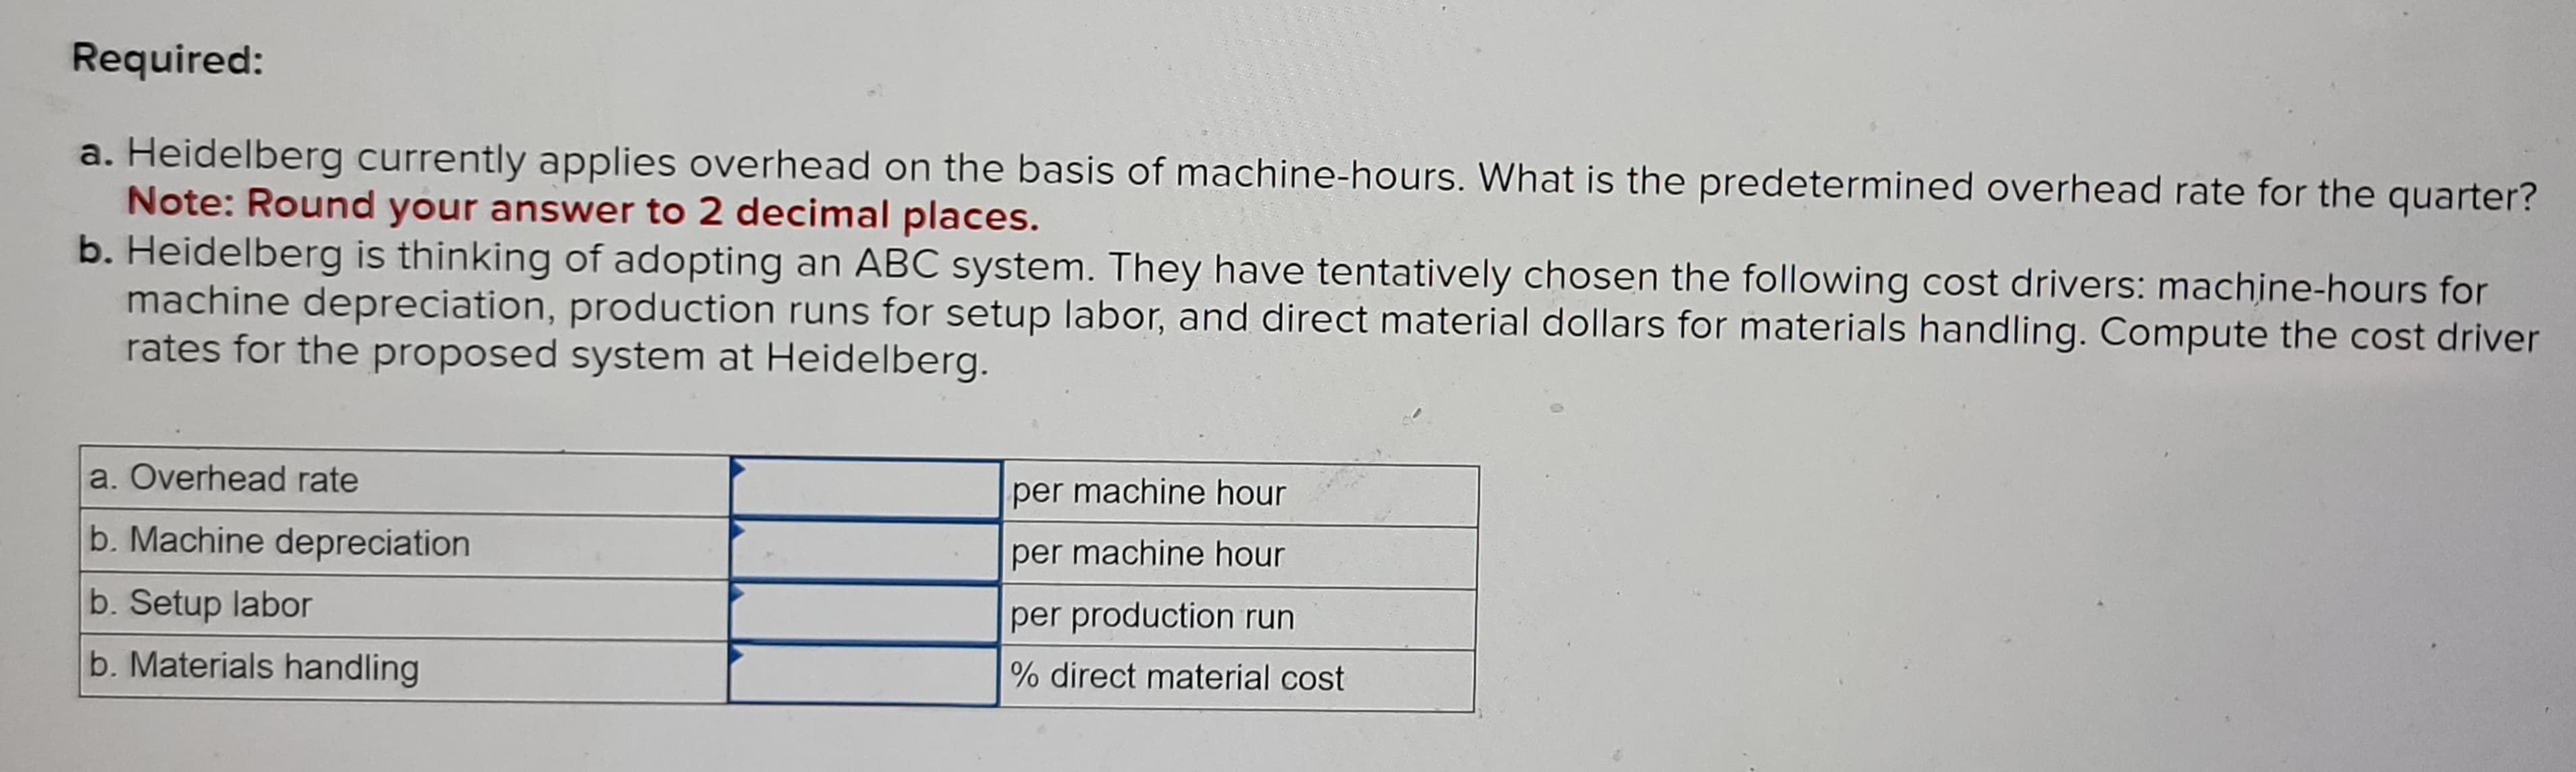 Required:
a. Heidelberg currently applies overhead on the basis of machine-hours. What is the predetermined overhead rate for the quarter?
Note: Round your answer to 2 decimal places.
b. Heidelberg is thinking of adopting an ABC system. They have tentatively chosen the following cost drivers: machine-hours for
machine depreciation, production runs for setup labor, and direct material dollars for materials handling. Compute the cost driver
rates for the proposed system at Heidelberg.
a. Overhead rate
b. Machine depreciation
b. Setup labor
b. Materials handling
per machine hour
per machine hour
per production run
% direct material cost